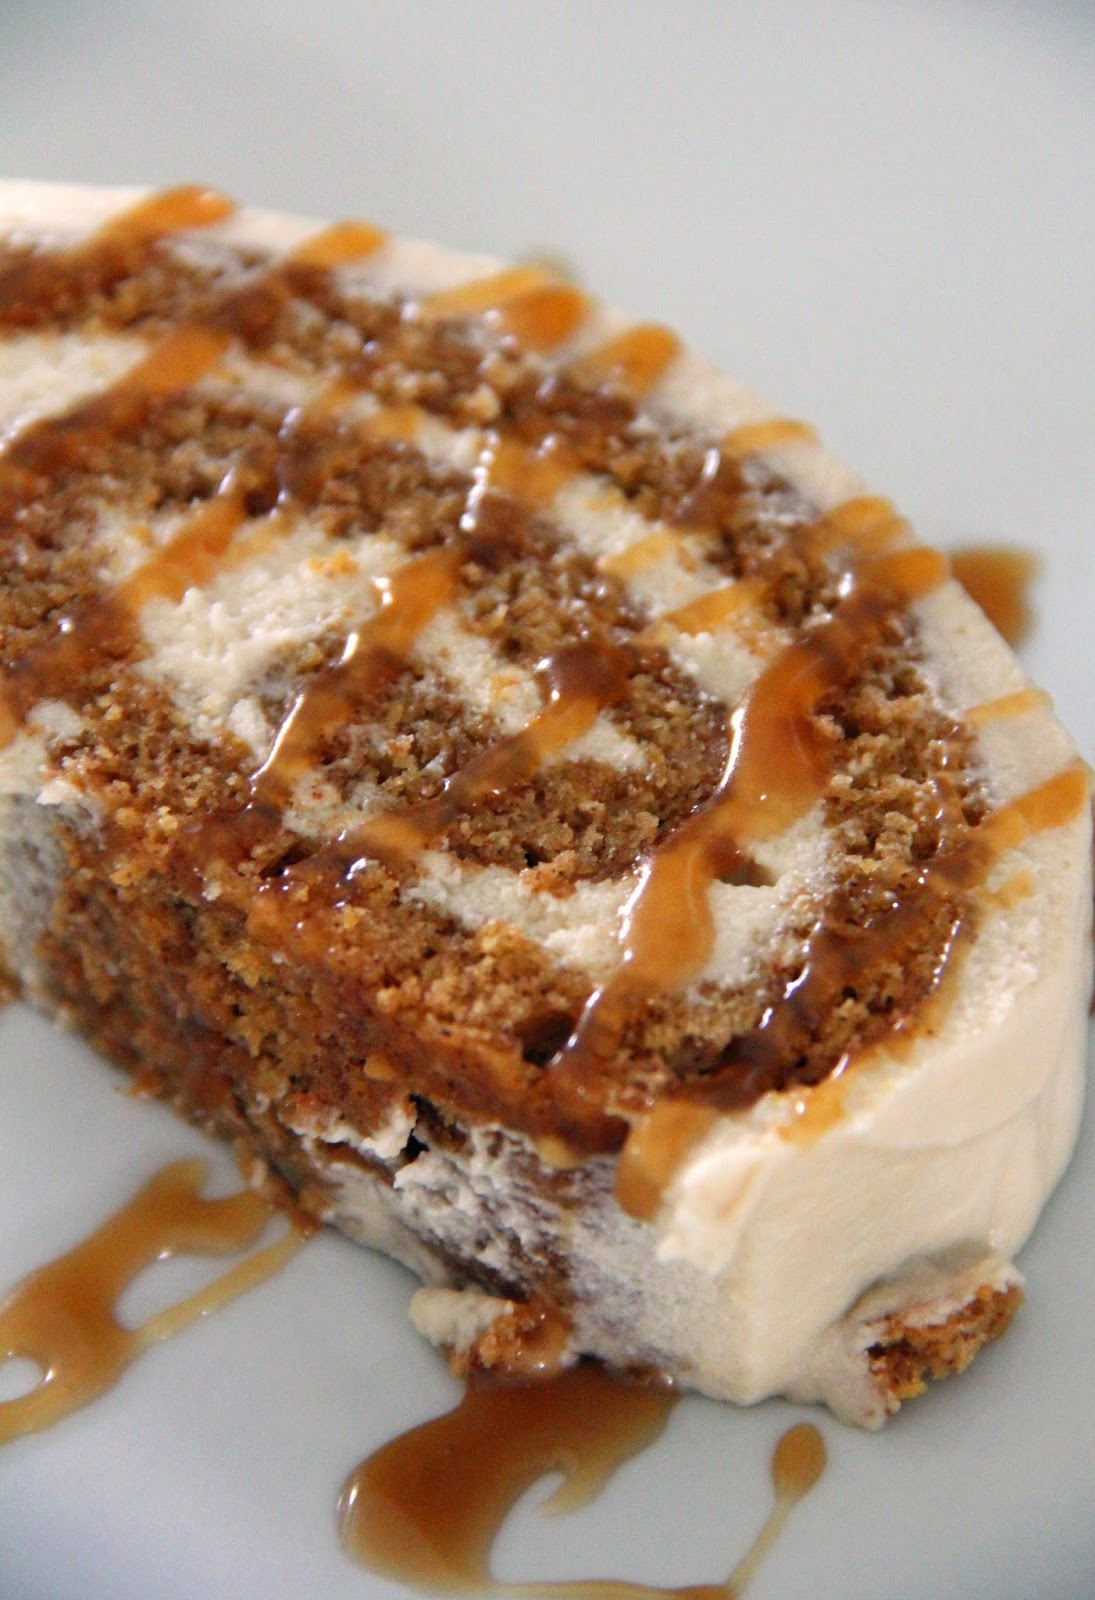 Jo and Sue: Pumpkin Spice Roll With Salted Caramel Mousse